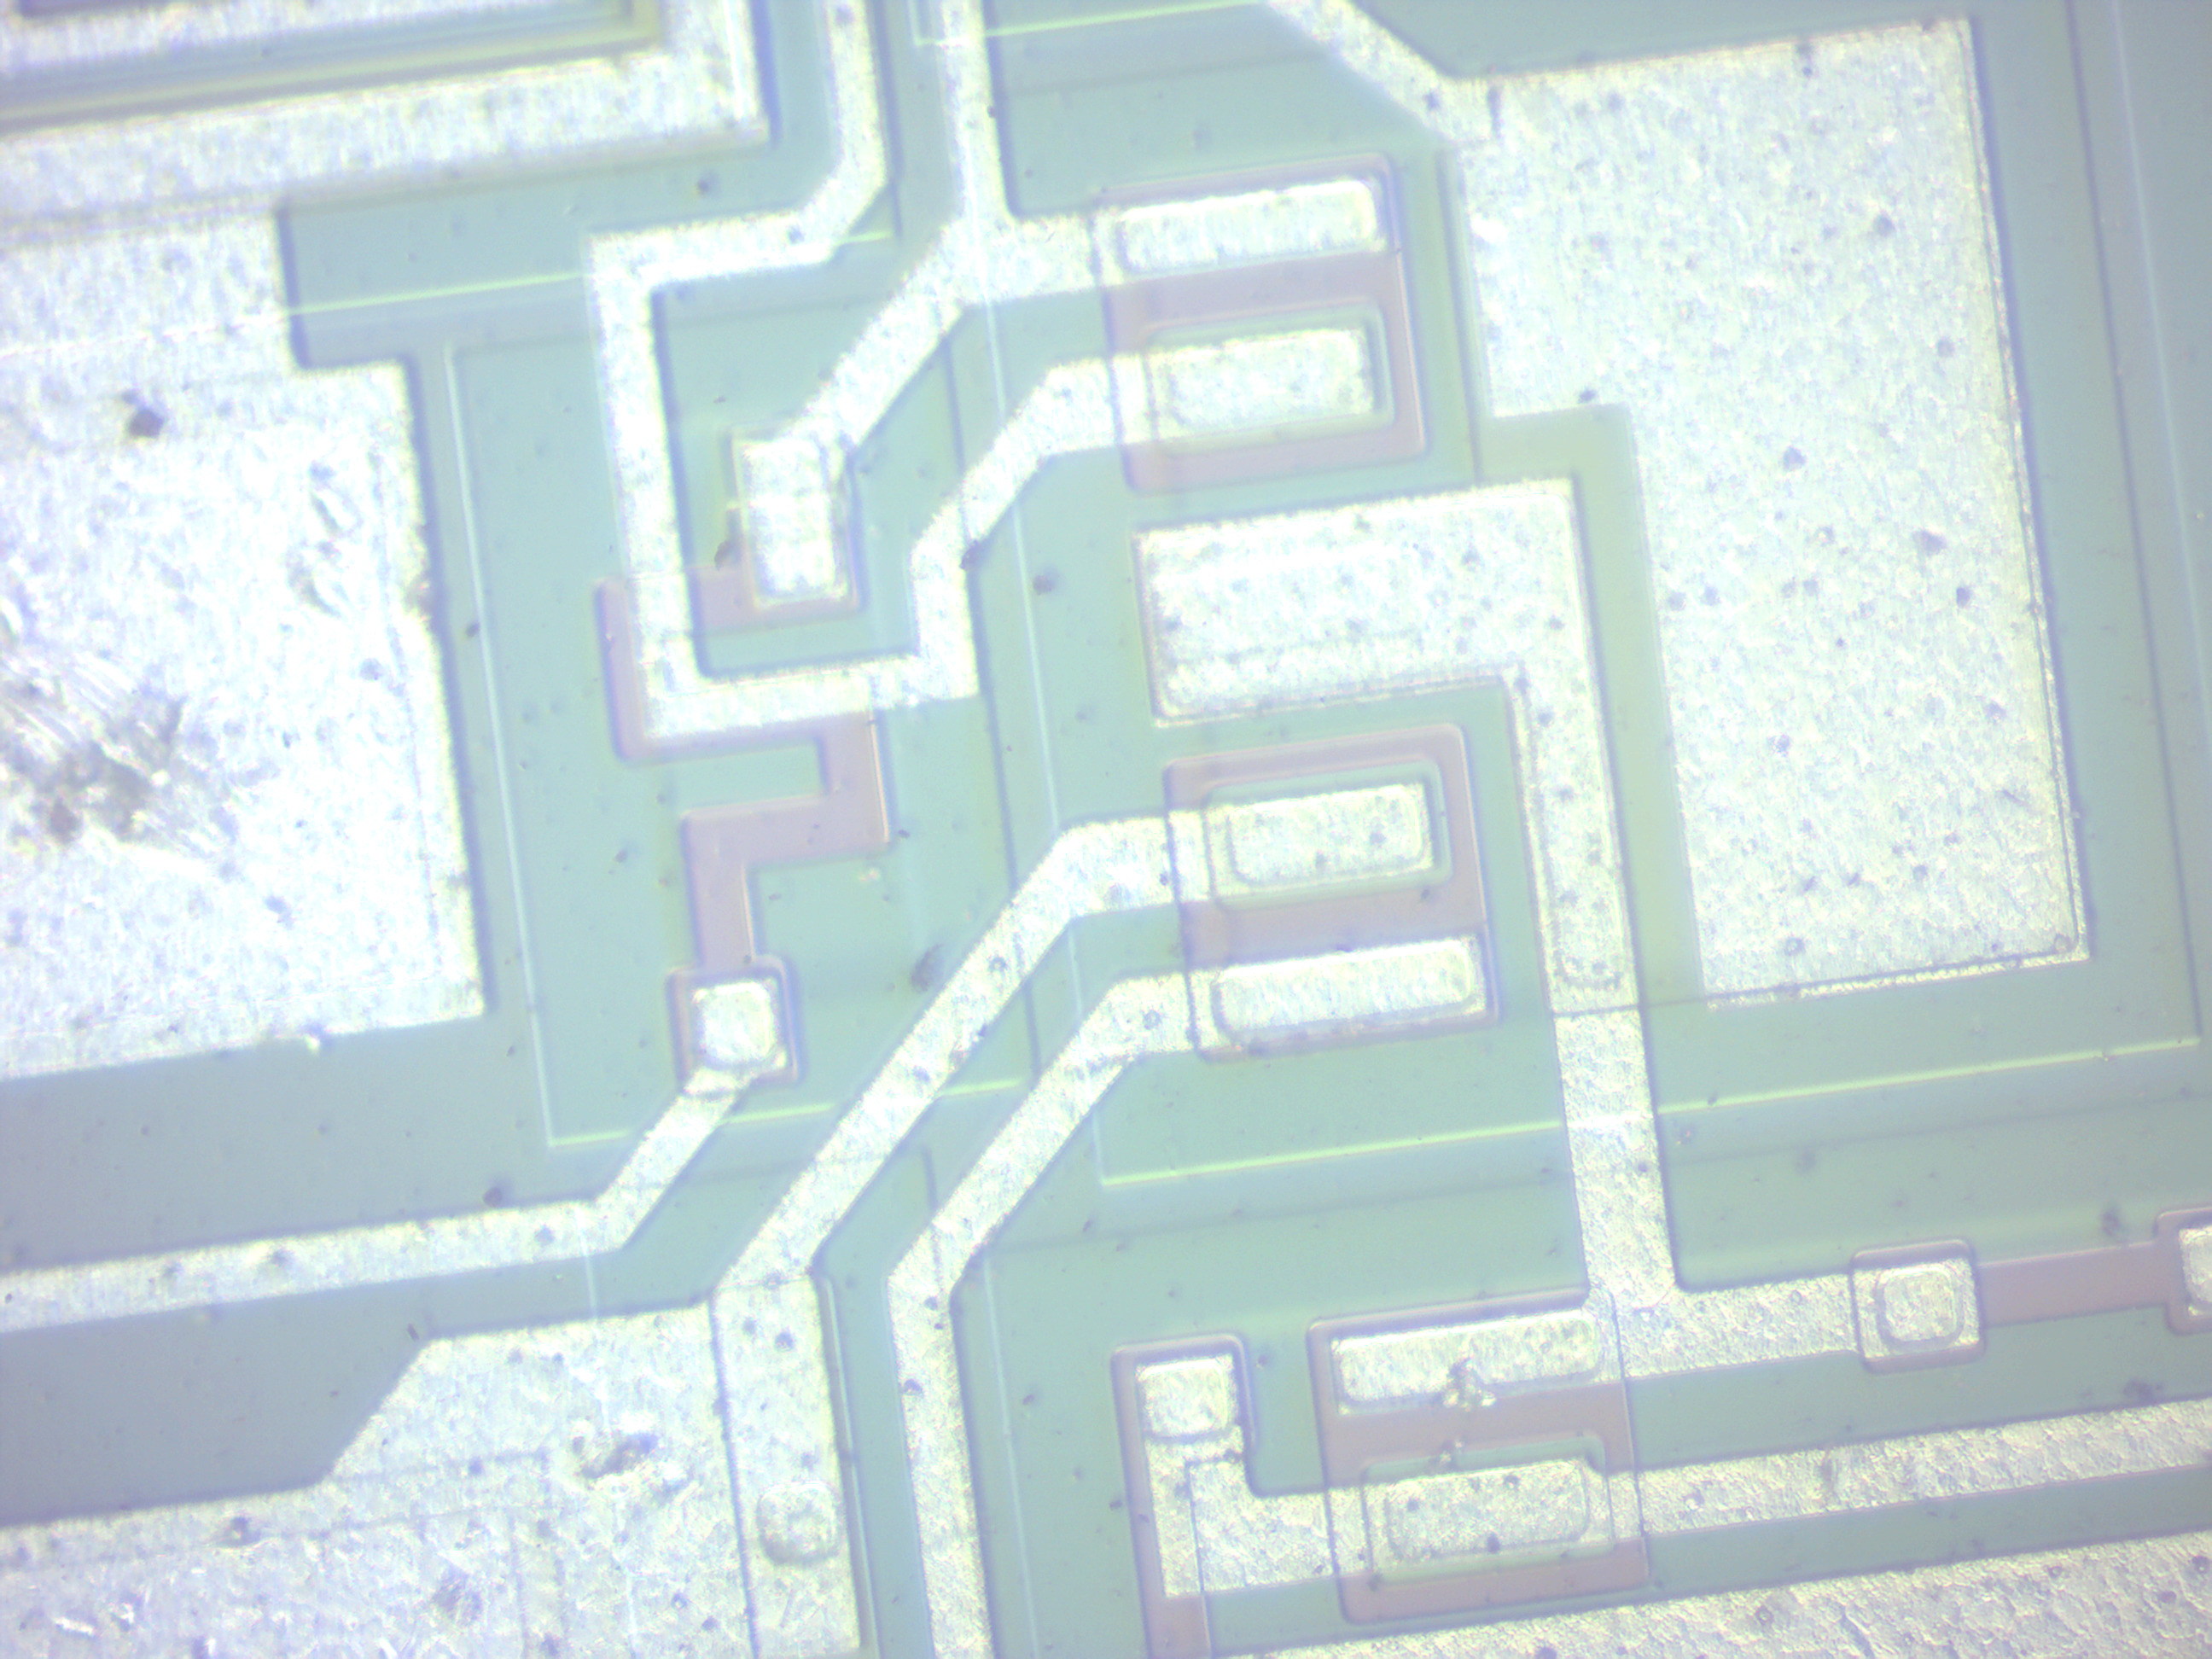 Close-up view of an electronic chip.